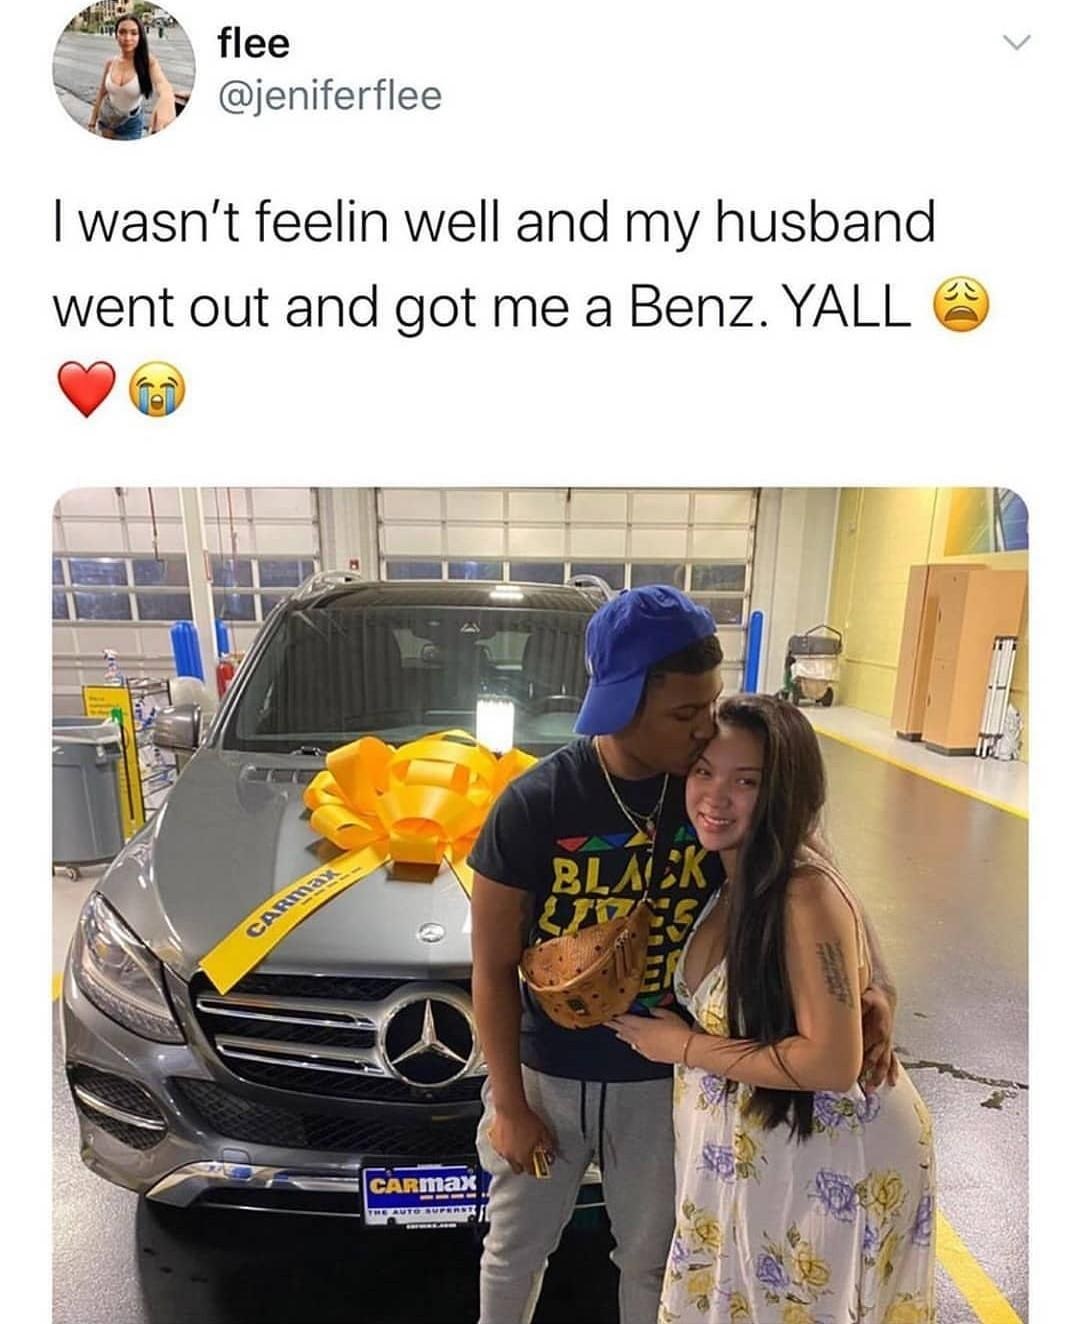 Chris 1 Meet The Man Who Bought His Wife a Benz Car Because She Was Not Feeling Well -SEE PHOTOS